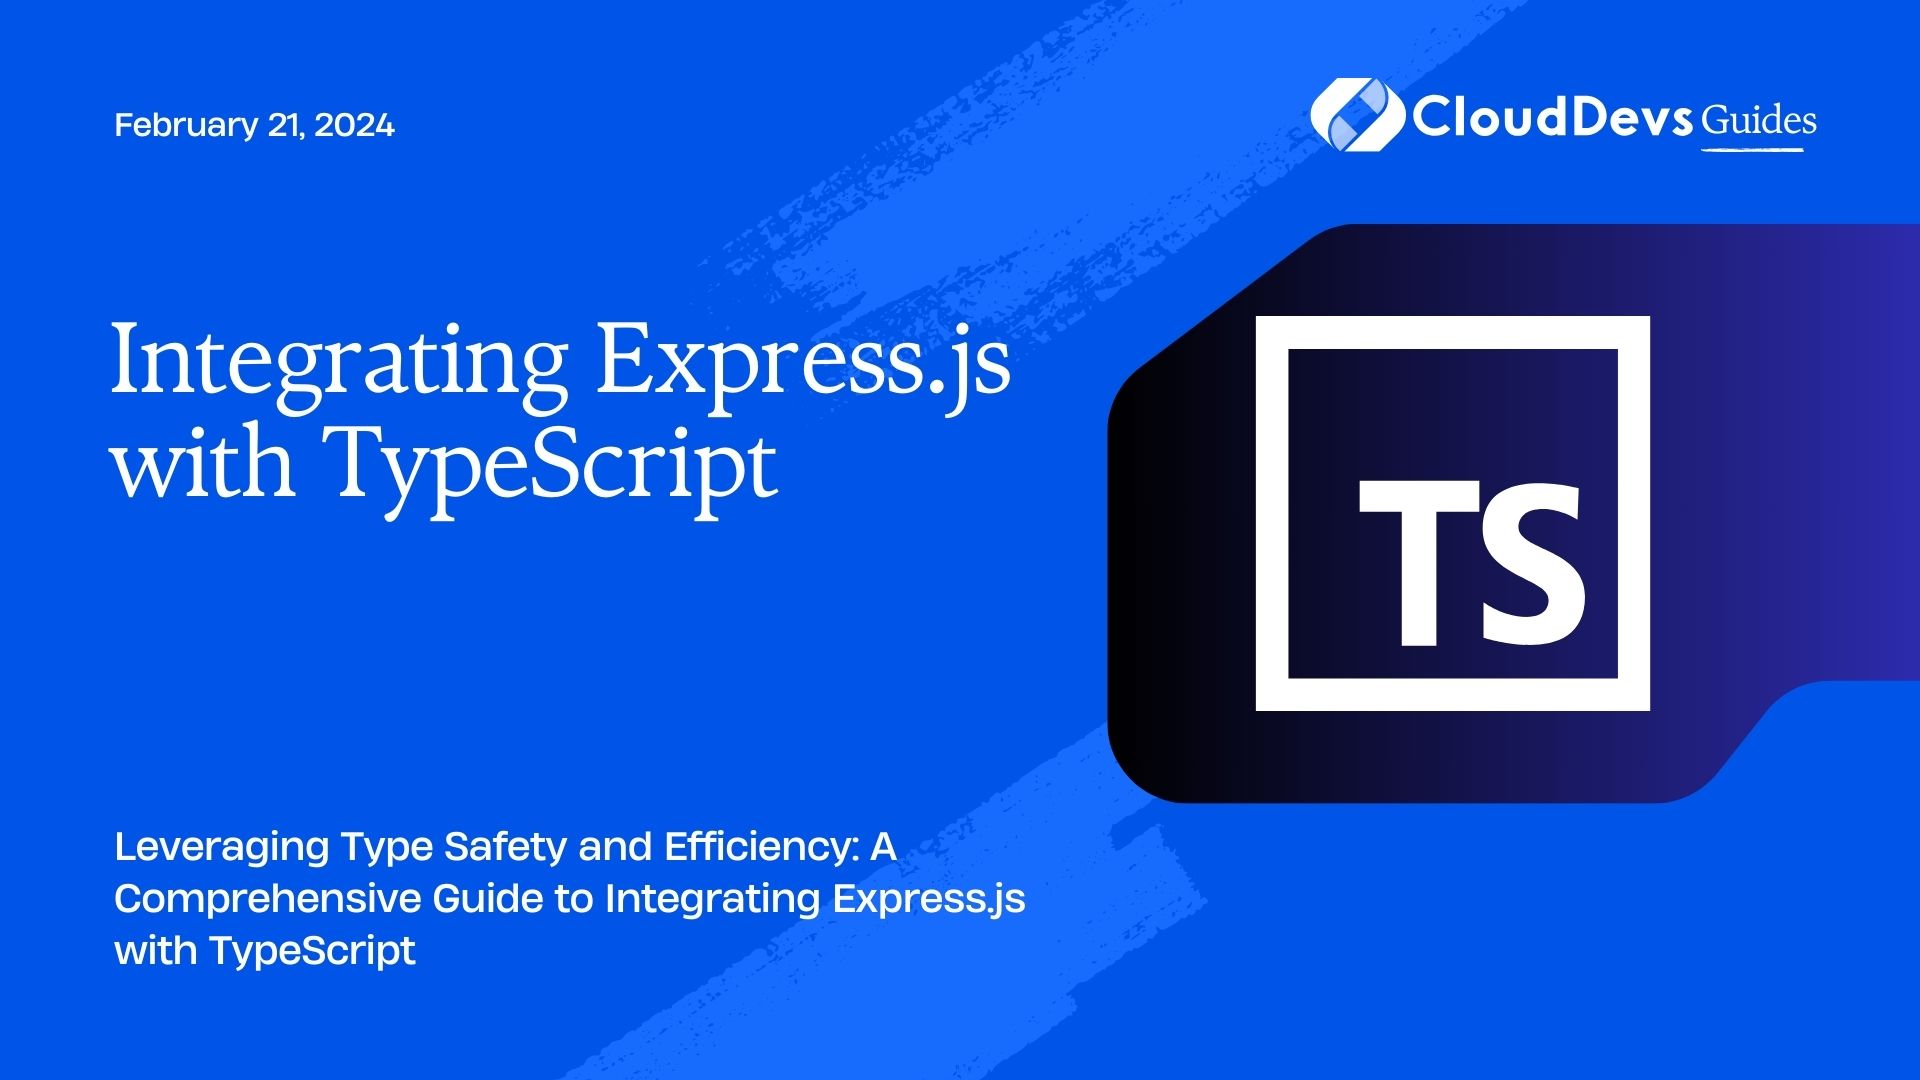 Integrating Express.js with TypeScript